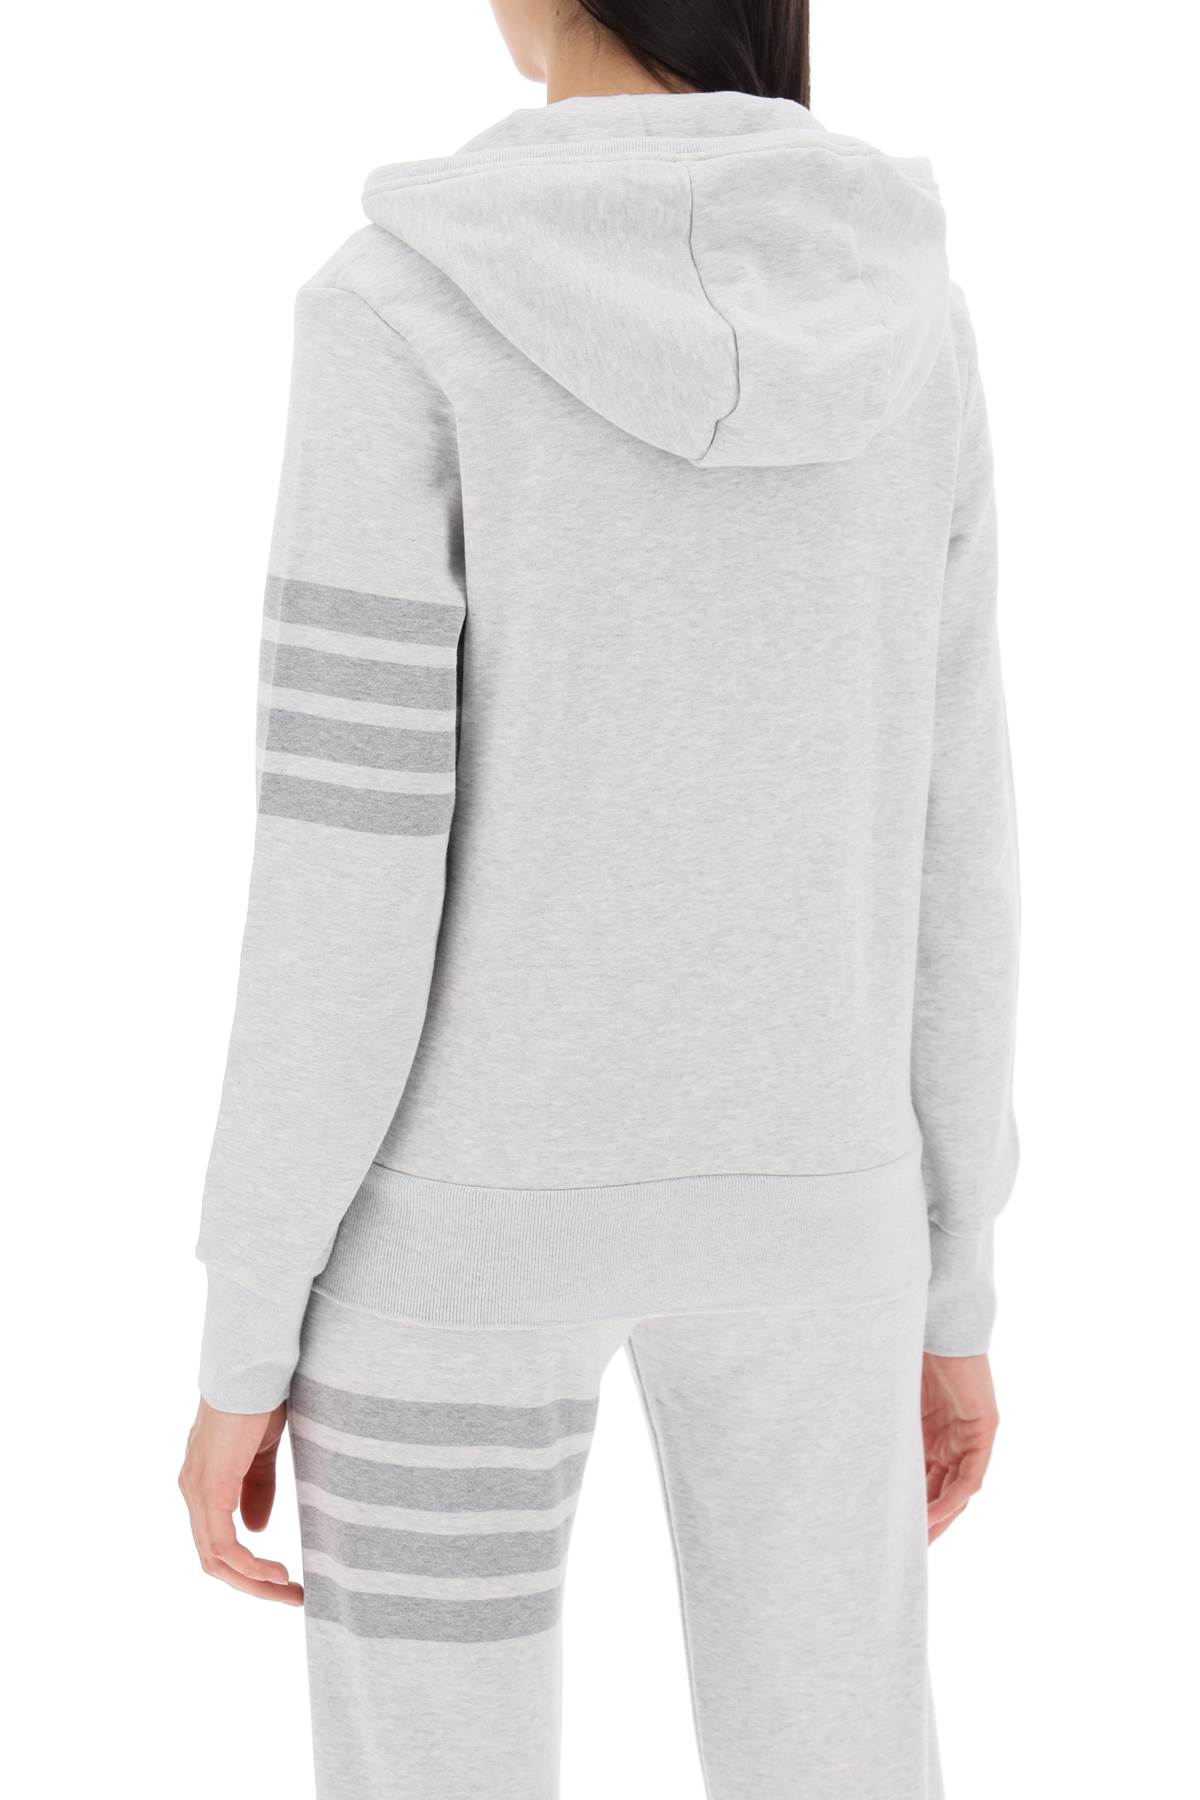 Shop Thom Browne 4-bar Hoodie With Zipper And In Grey